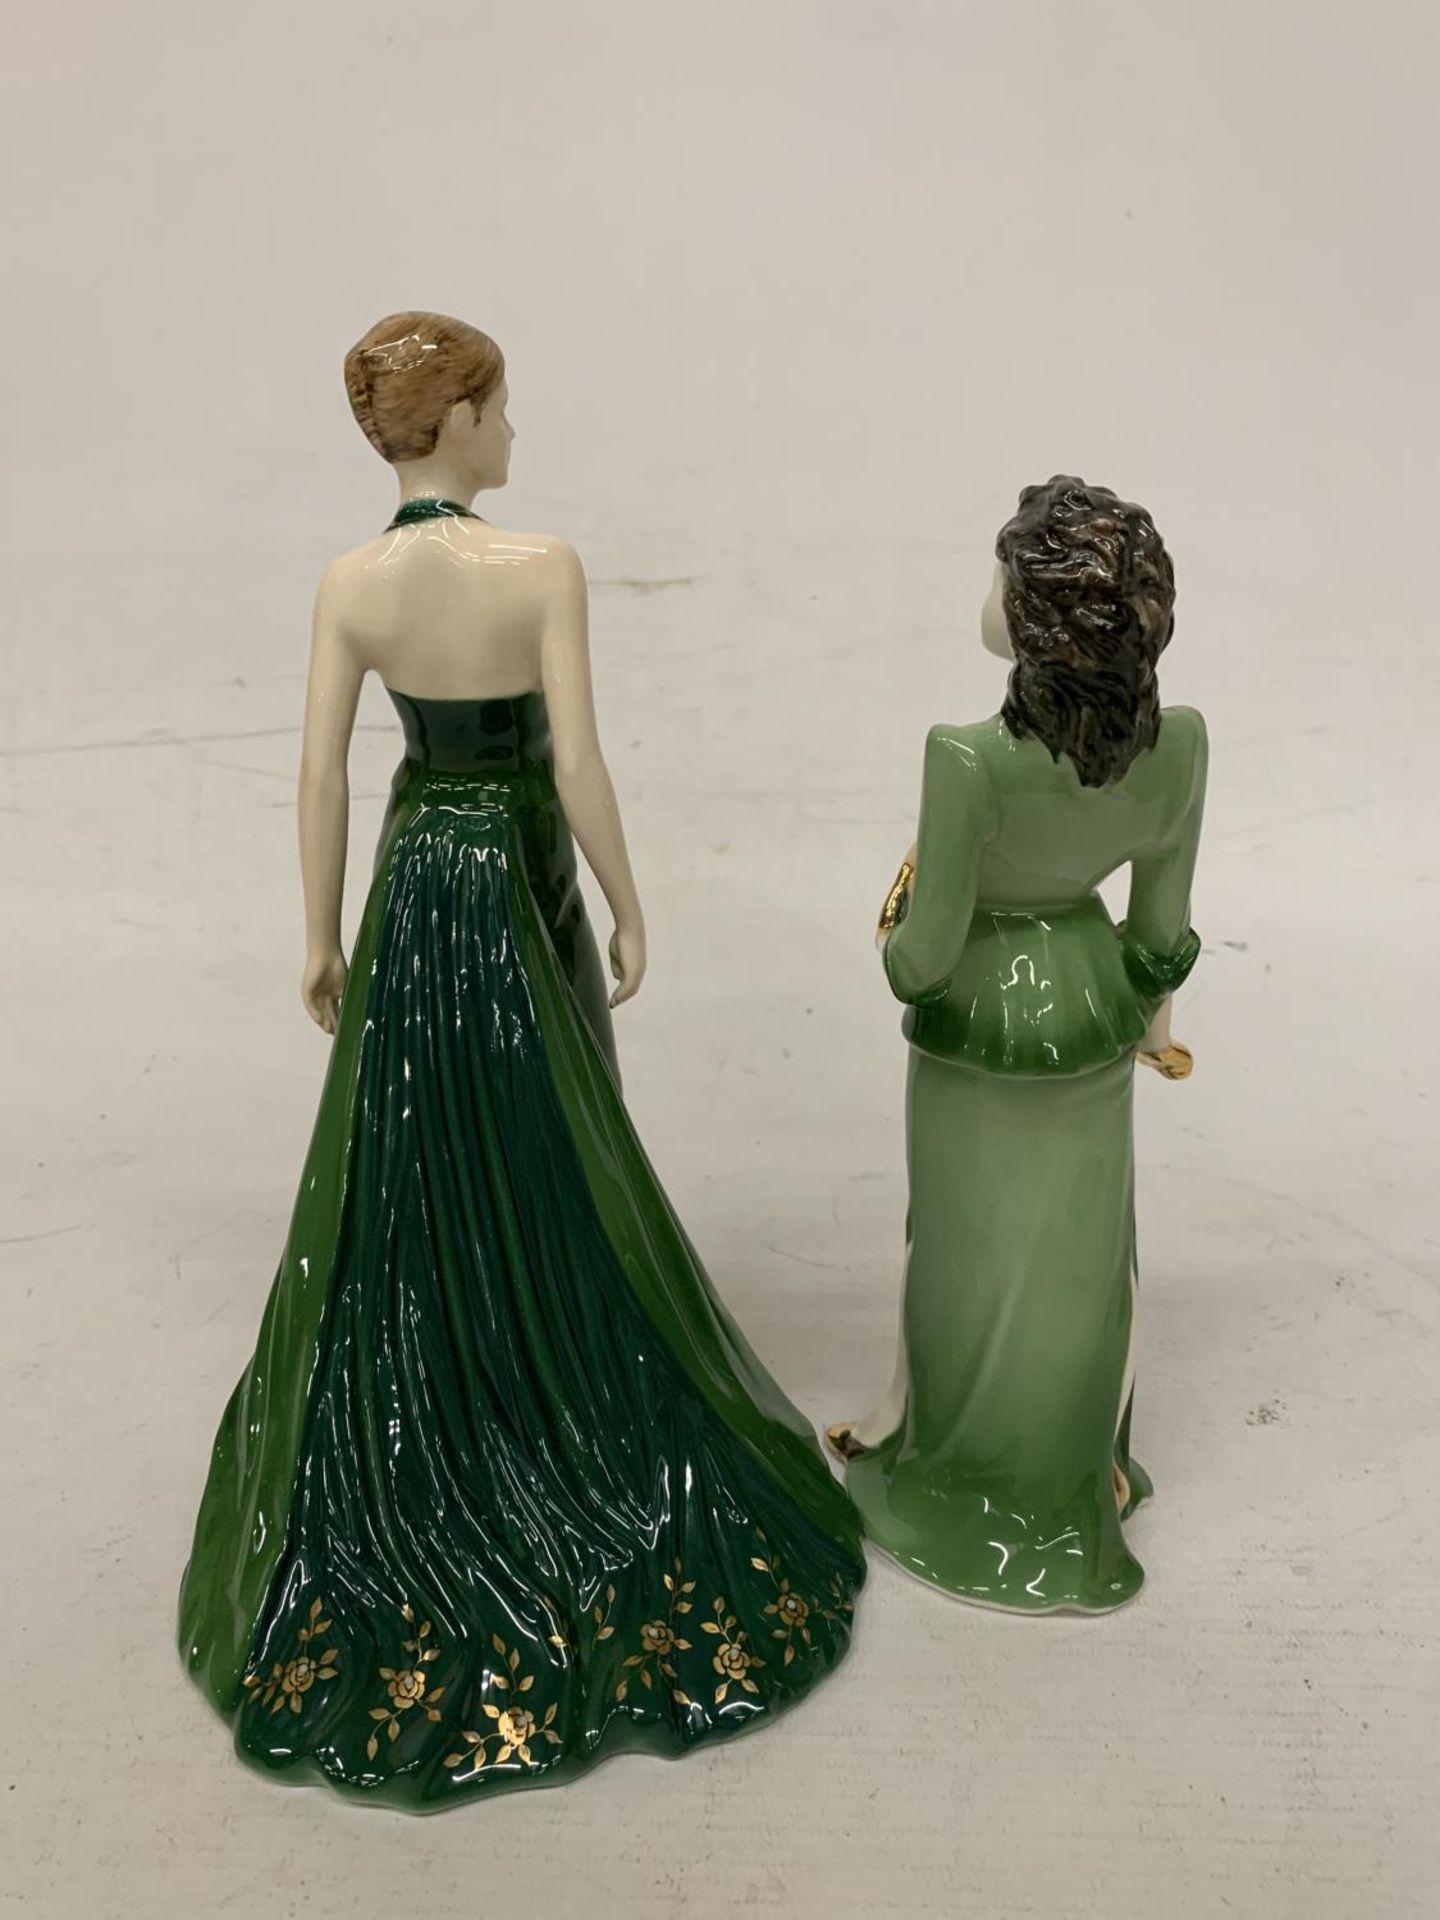 TWO COALPORT FIGURINES "VIVIEN" FROM THE WESTEND GIRLS COLLECTION (1992) AND "SAMANTHA" FIGURE OF - Image 3 of 5